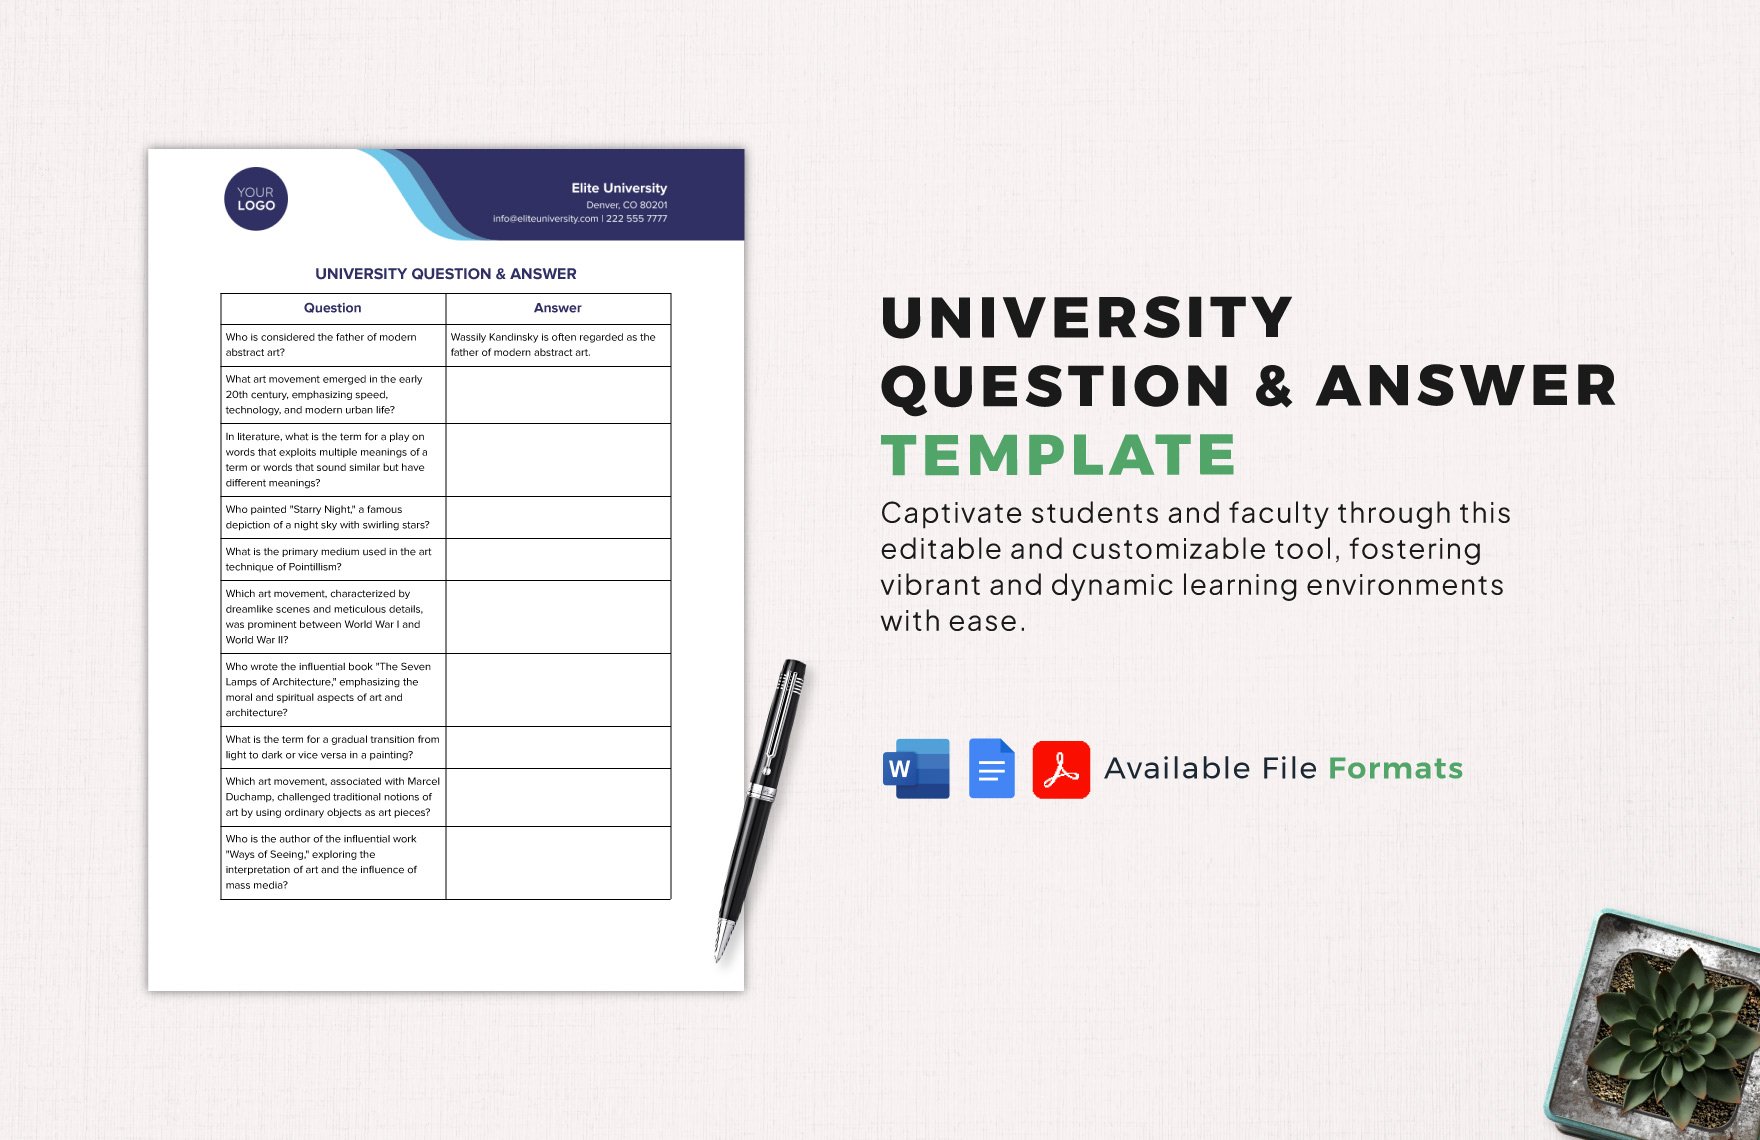 University Question & Answer Template